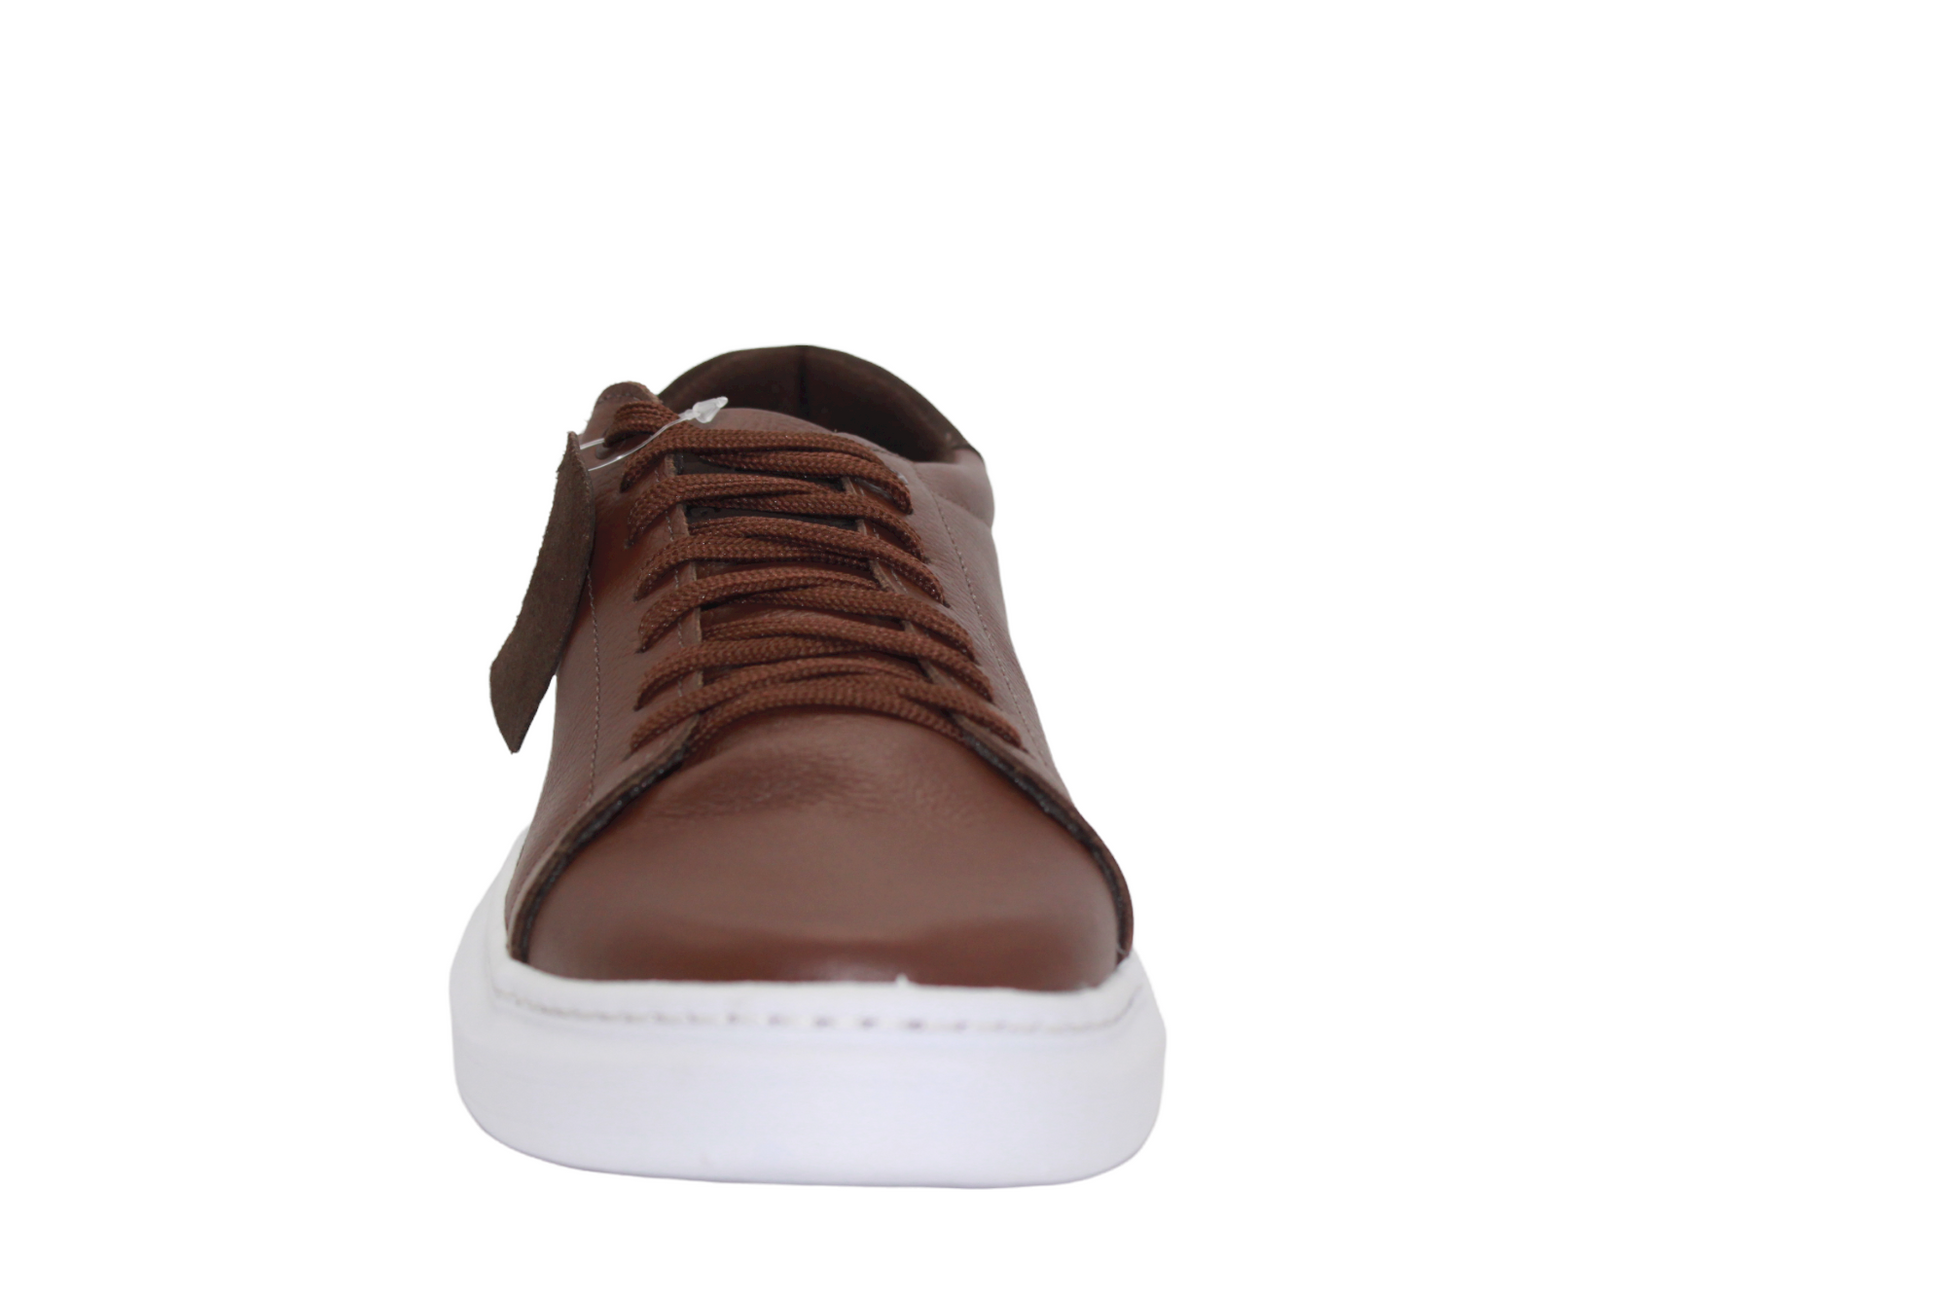 Brown and White Leather Sneakers - Julia & Santos 